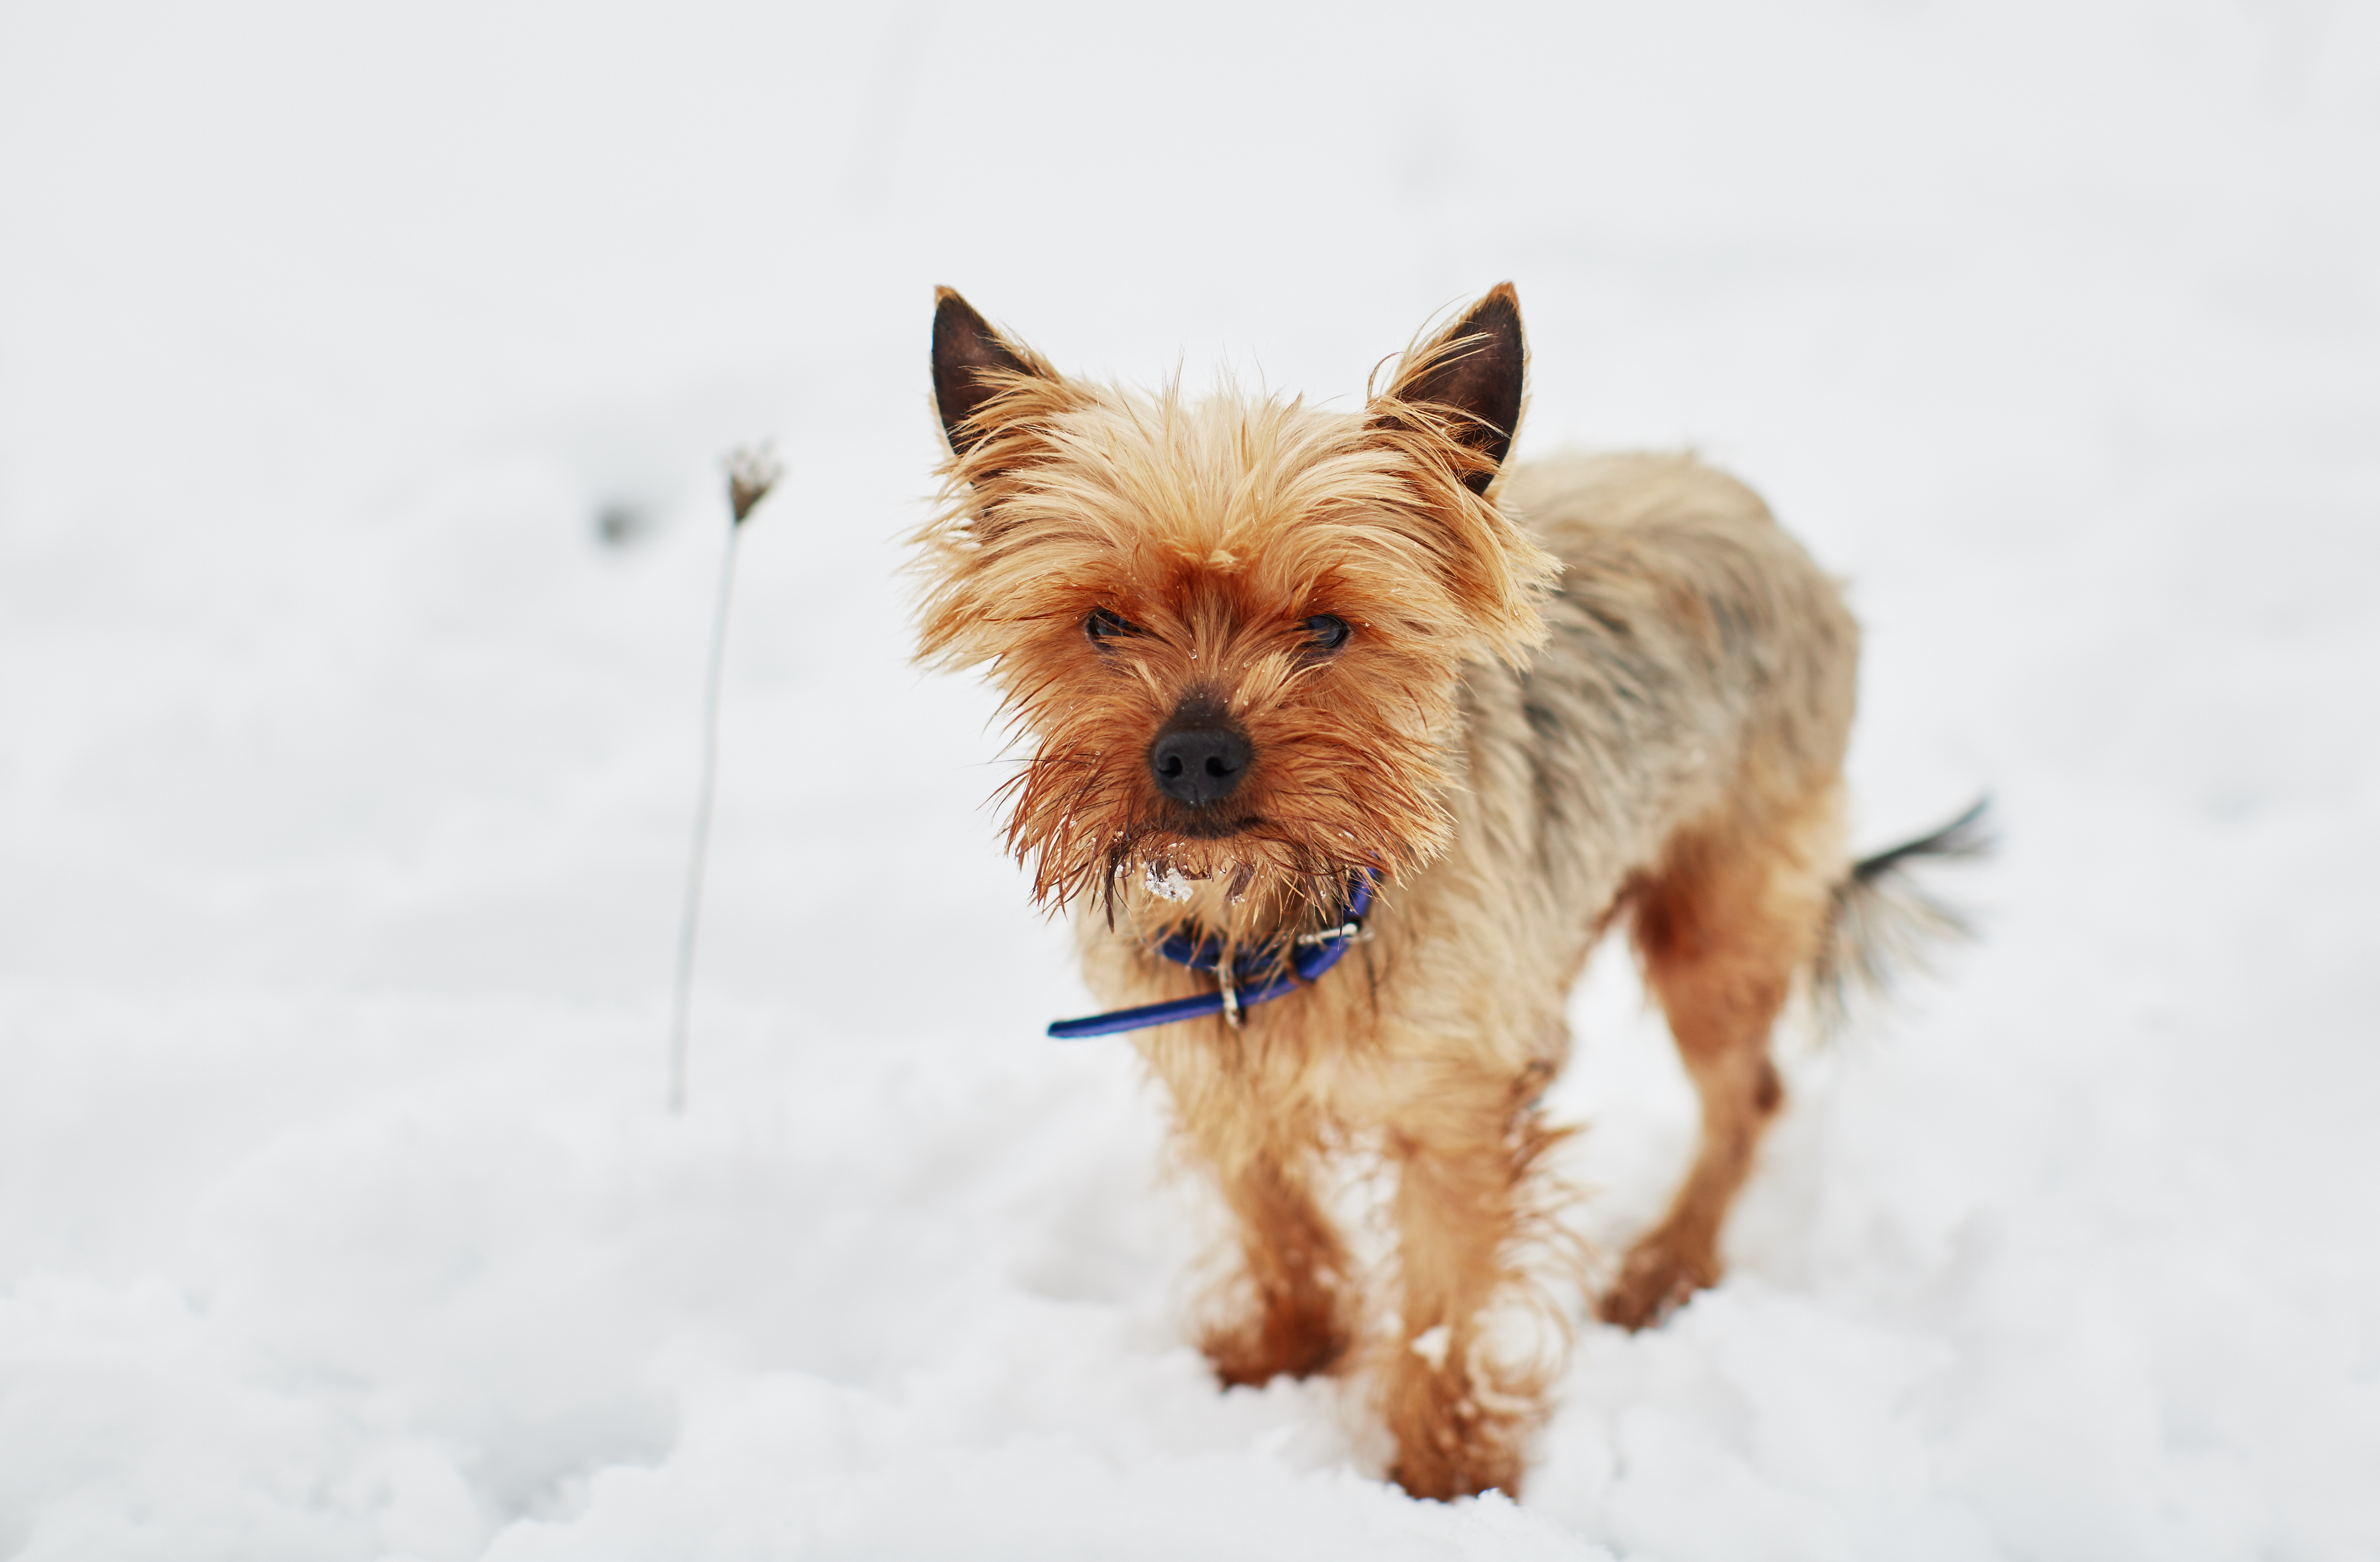 Care for Pets in Extreme Cold